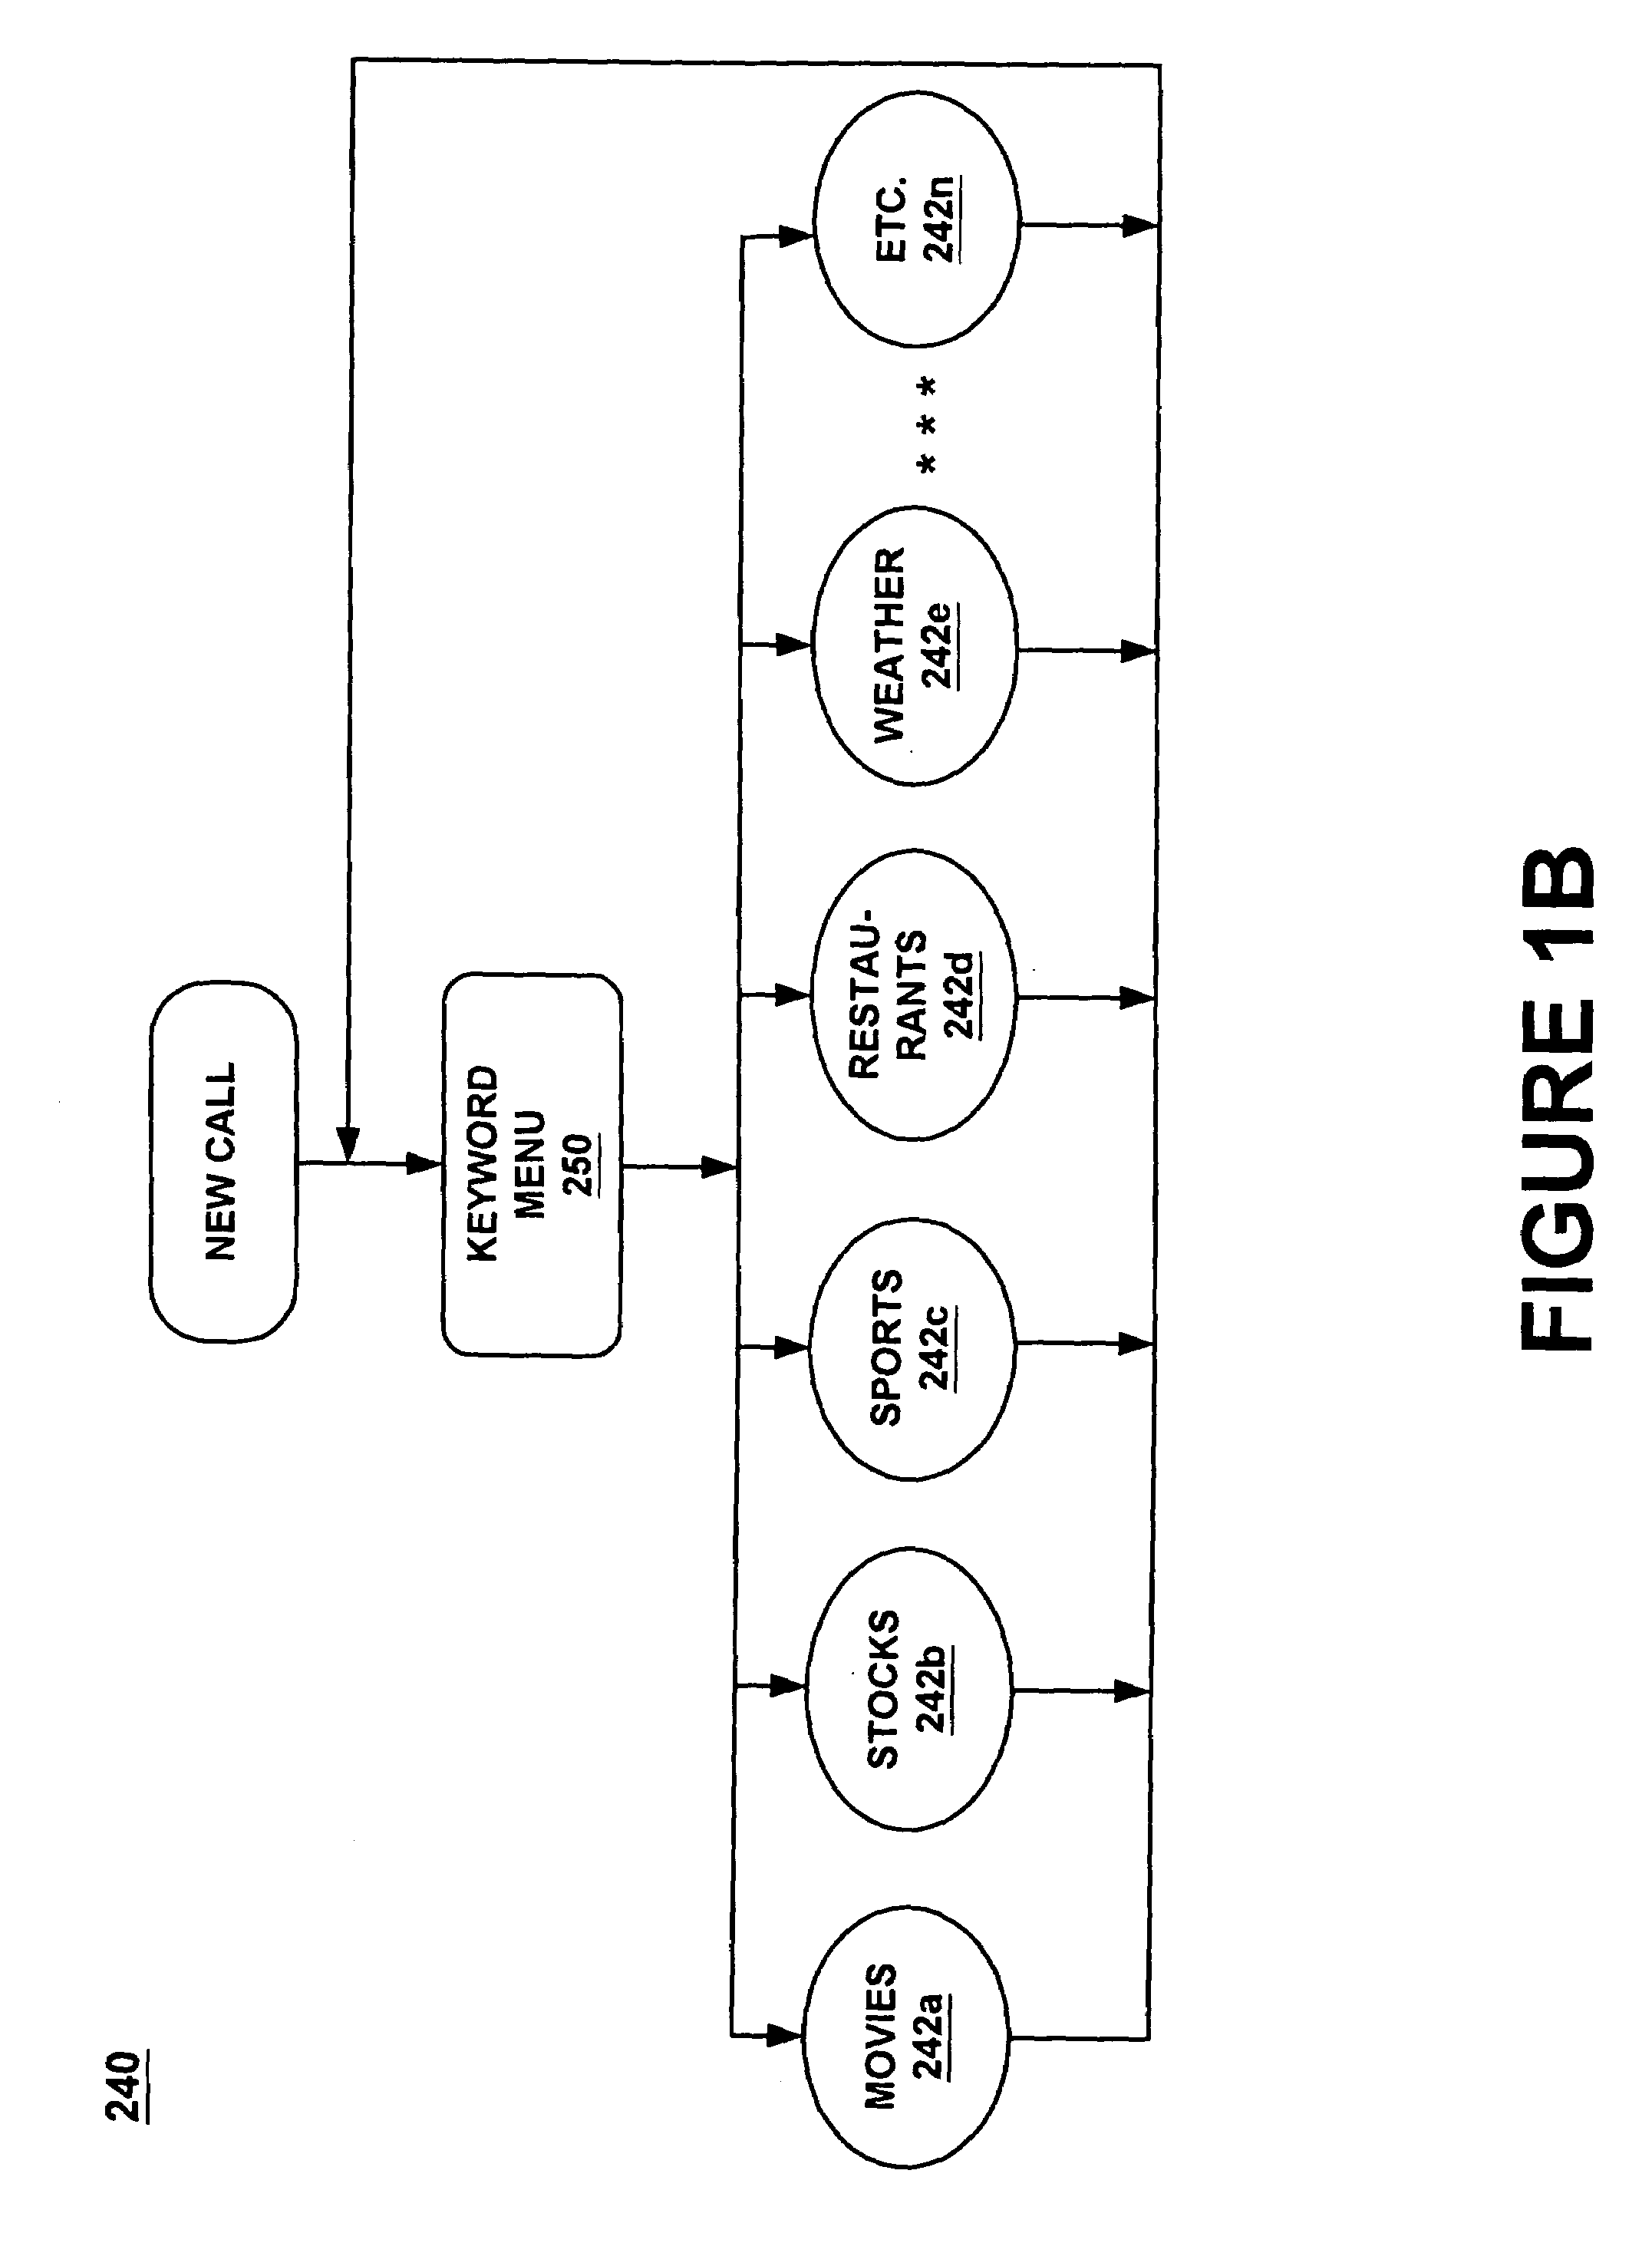 Providing services for an information processing system using an audio interface